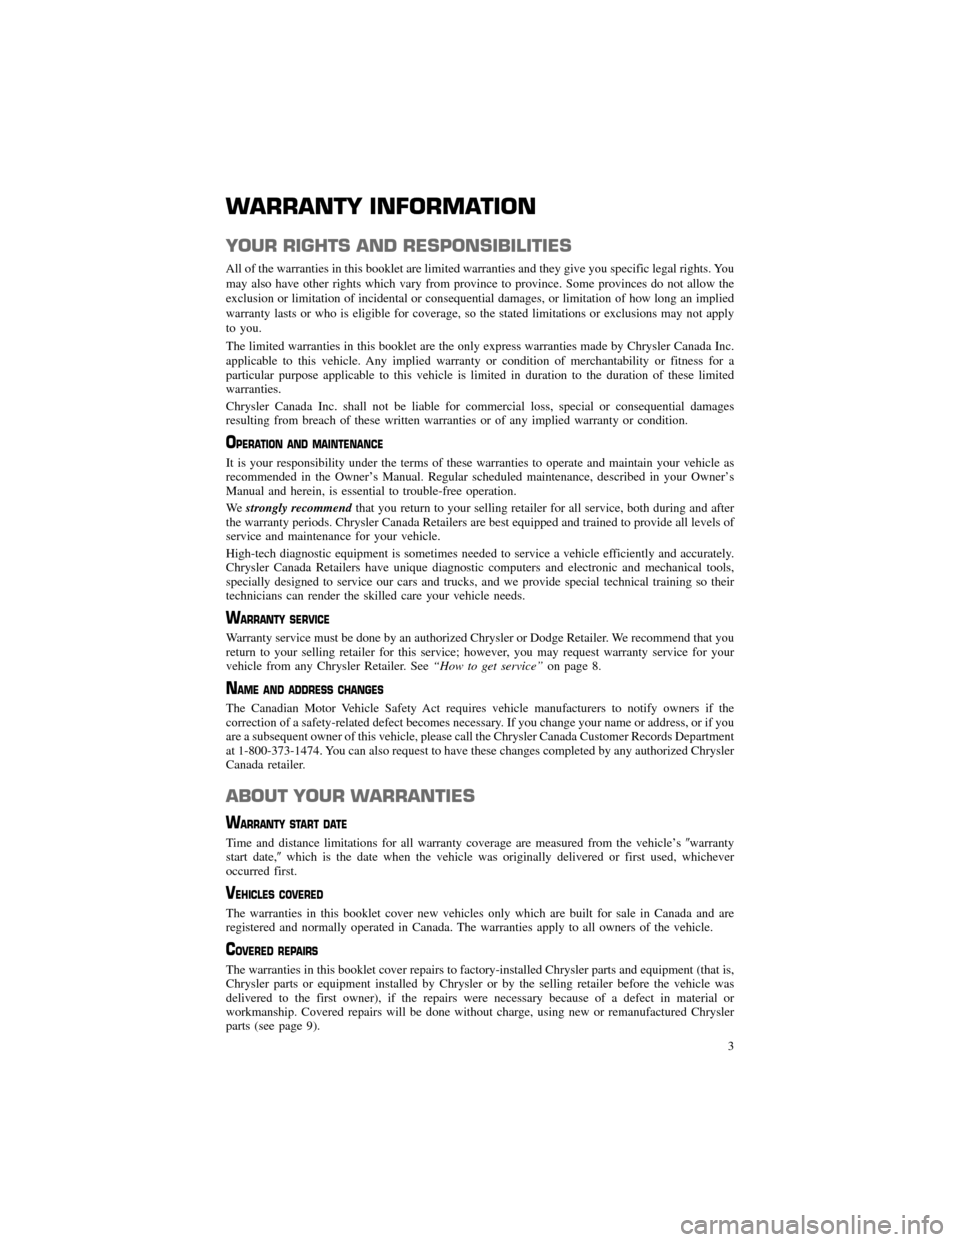 CHRYSLER 300 2013 2.G Warranty Booklet WARRANTY INFORMATION
YOUR RIGHTS AND RESPONSIBILITIES
All of the warranties in this booklet are limited warranties and they give you specific legal rights. You 
may also have other rights which vary f